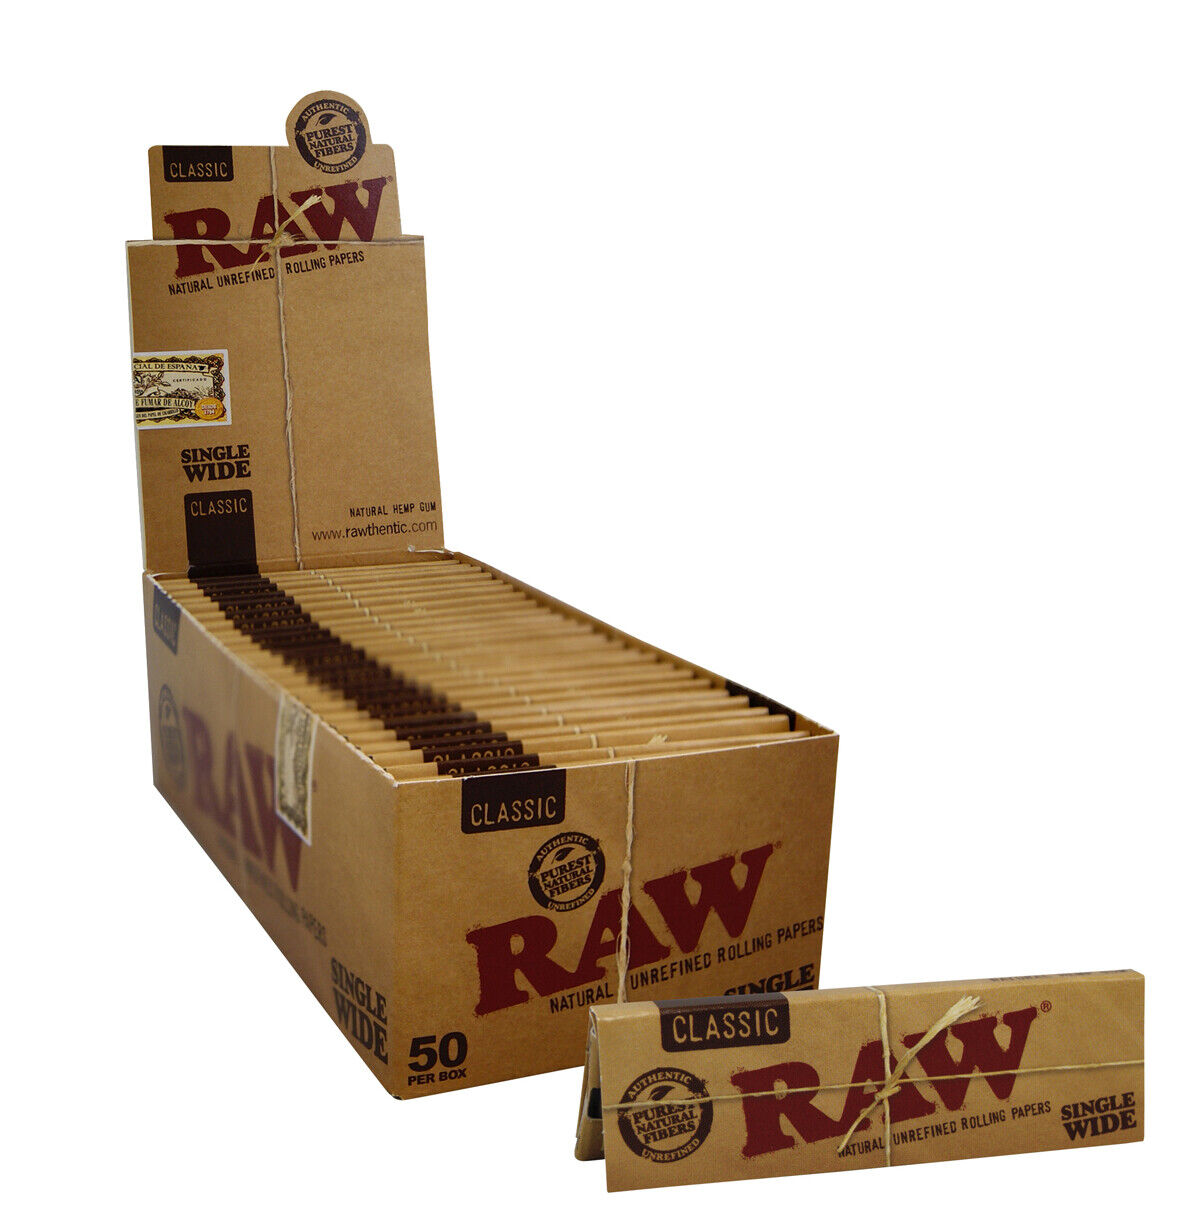 1 Box (50x) RAW Classic Regular Single Wide Short Leaves Unbleached Papers